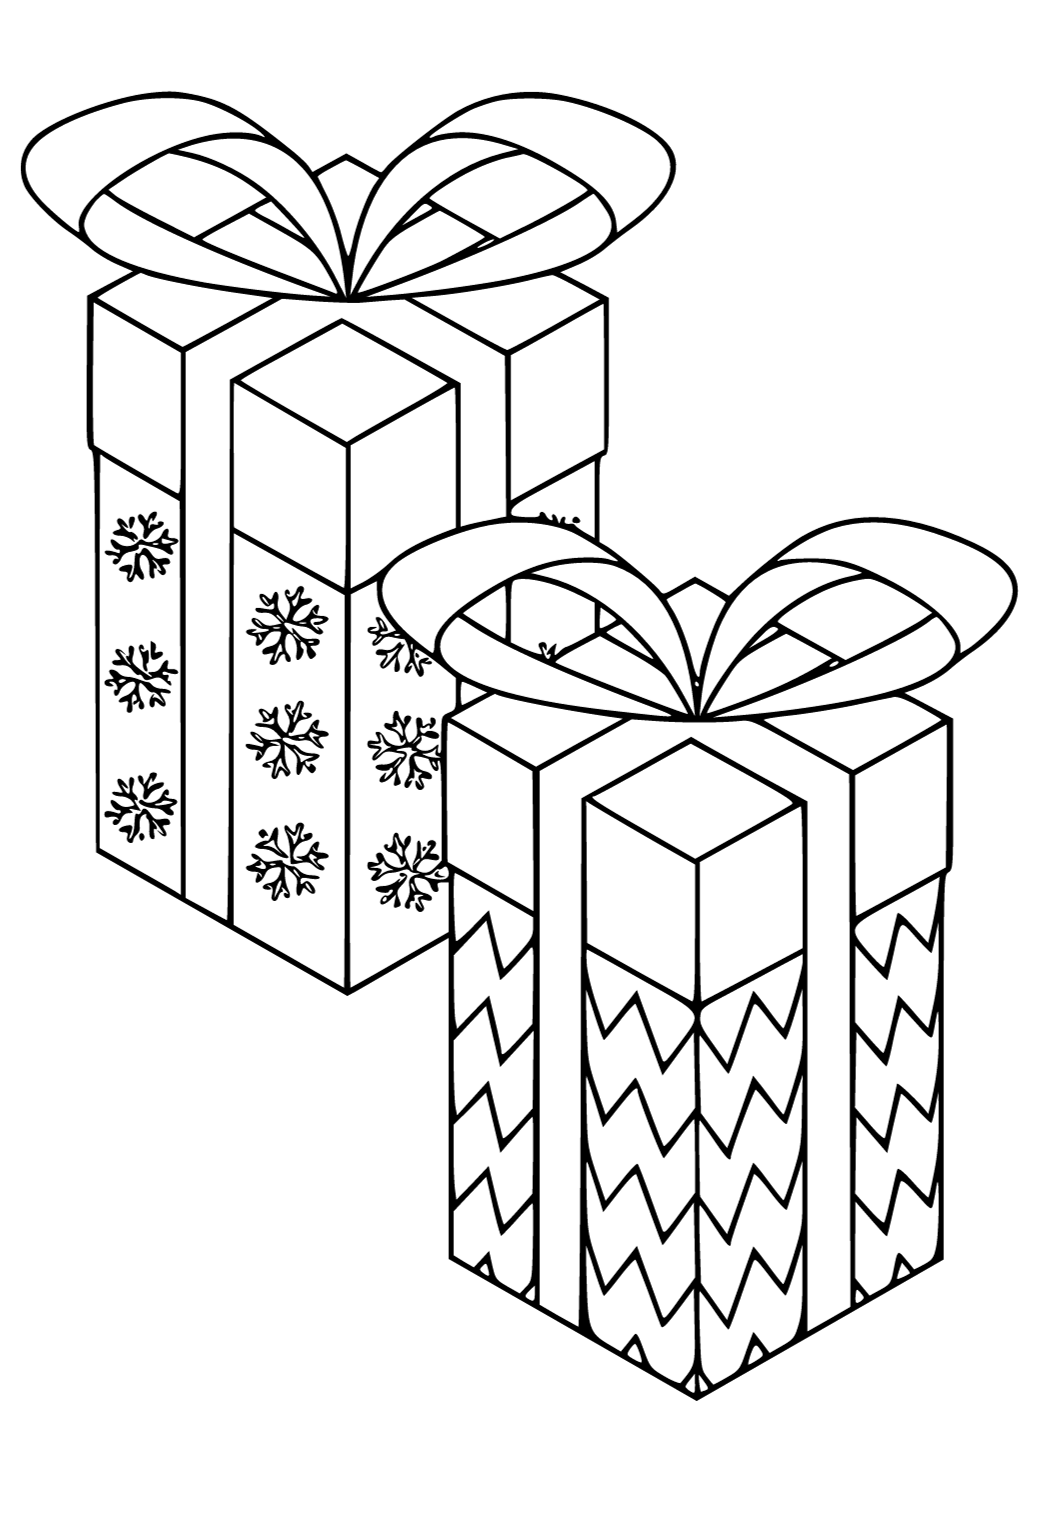 Free printable present boxes coloring page for adults and kids